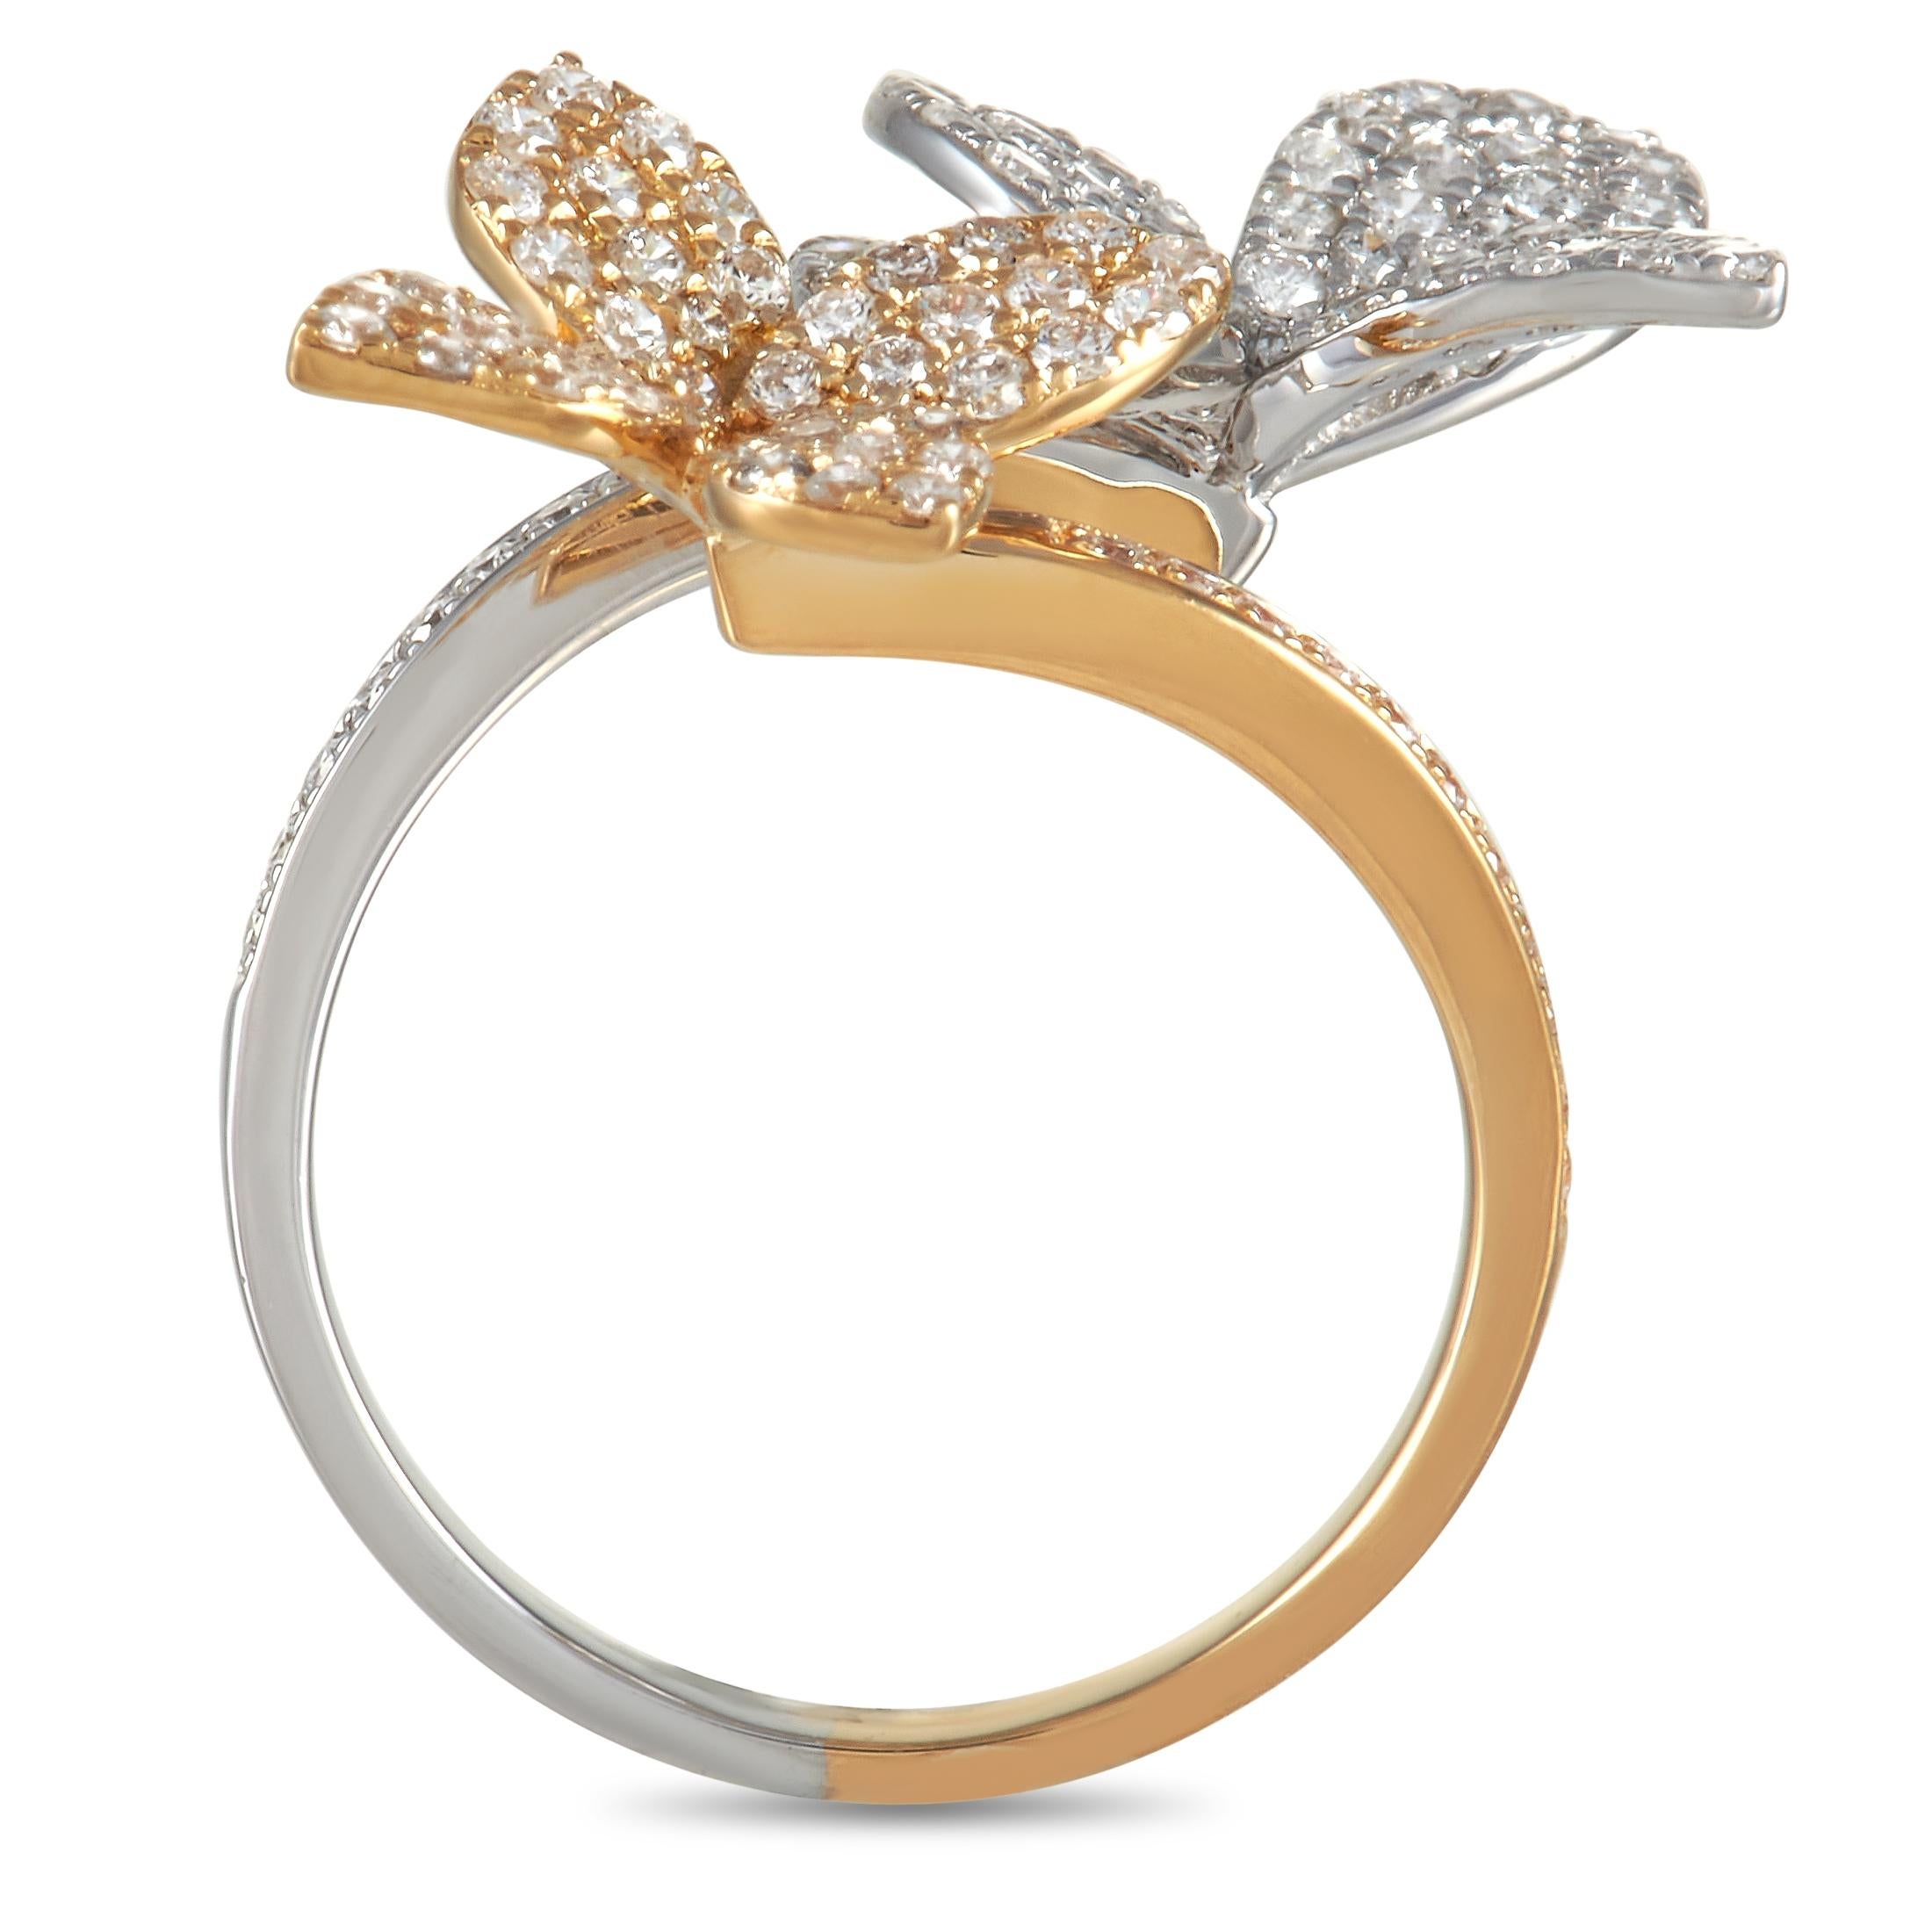 There’s something spectacular about this exquisite butterfly ring. A combination of 18K White Gold and 18K Yellow Gold create a delightful contrast on this impeccable accessory, which features a 1mm wide band and a 7mm top height. It’s also adorned